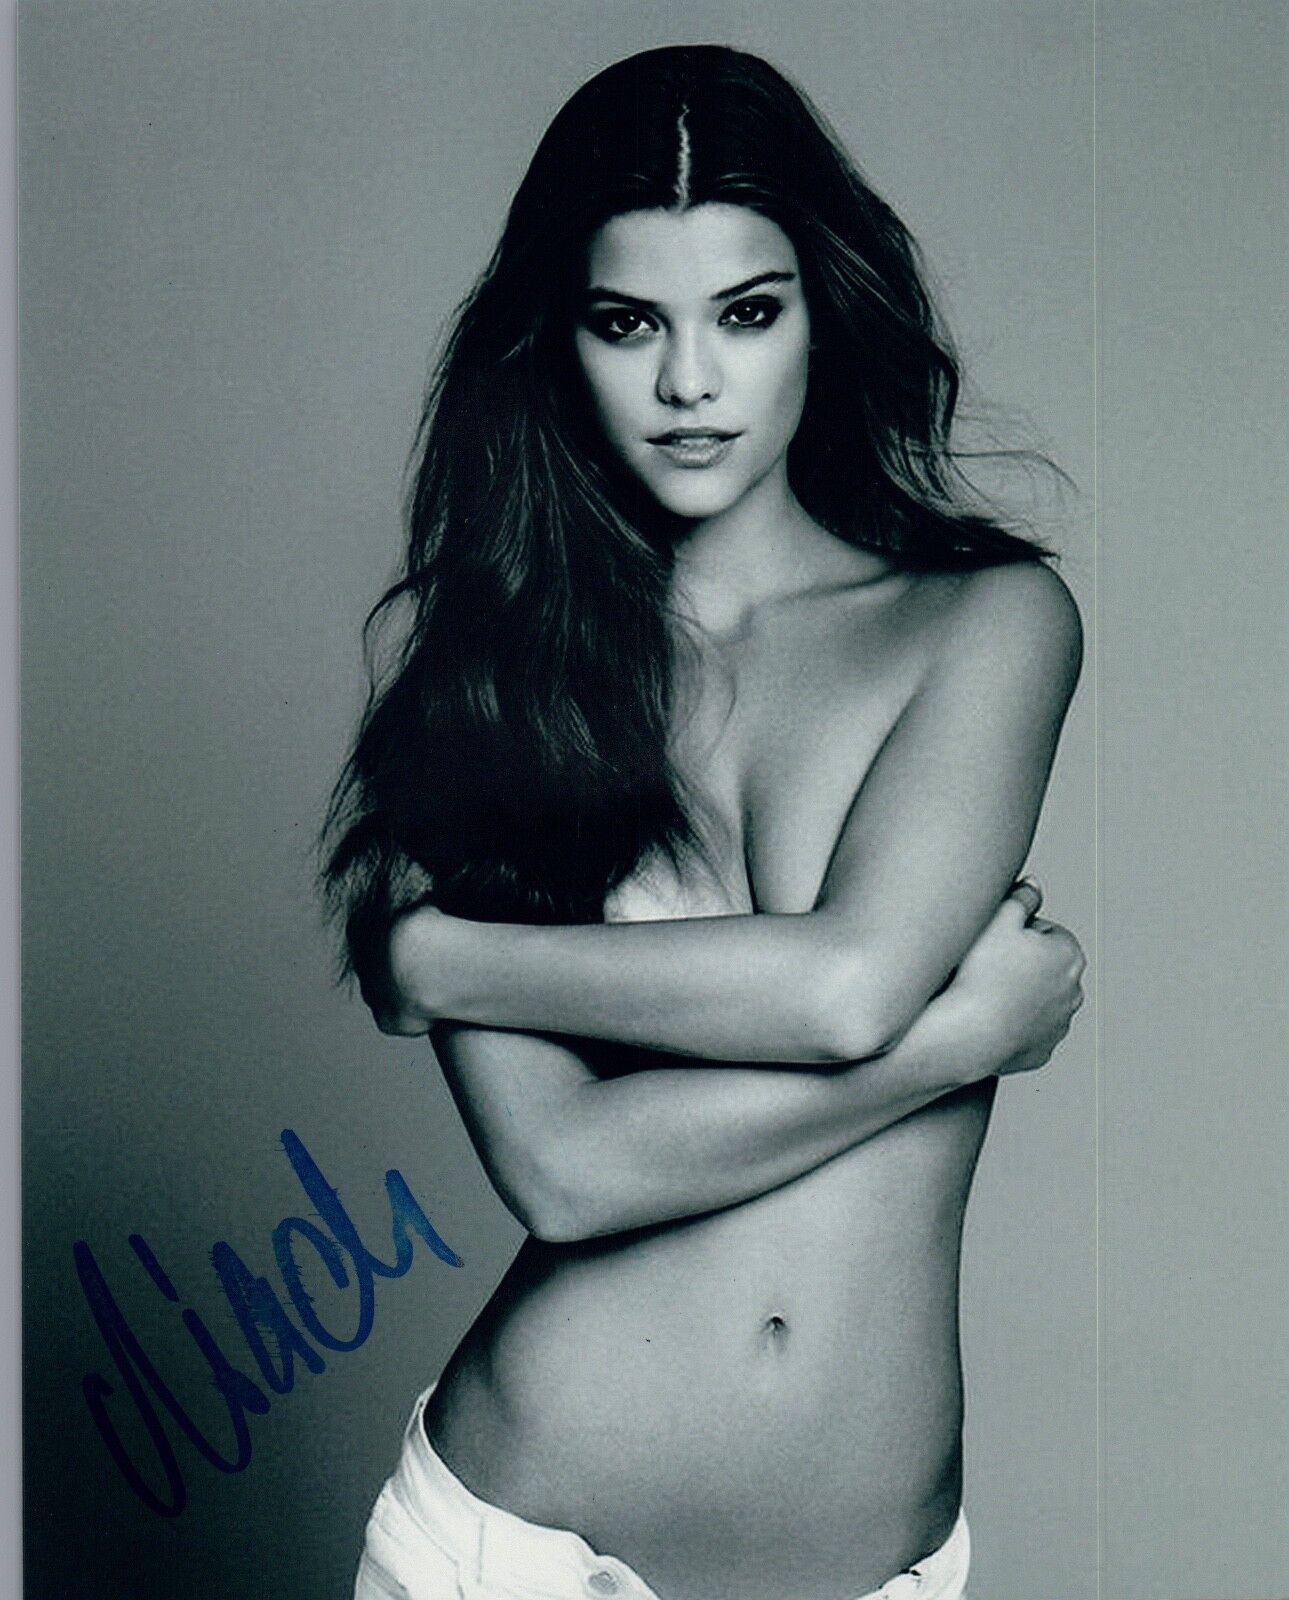 Nina Agdal Signed Autograph 8x10 Photo Poster painting SI Swimsuit Model COA VD